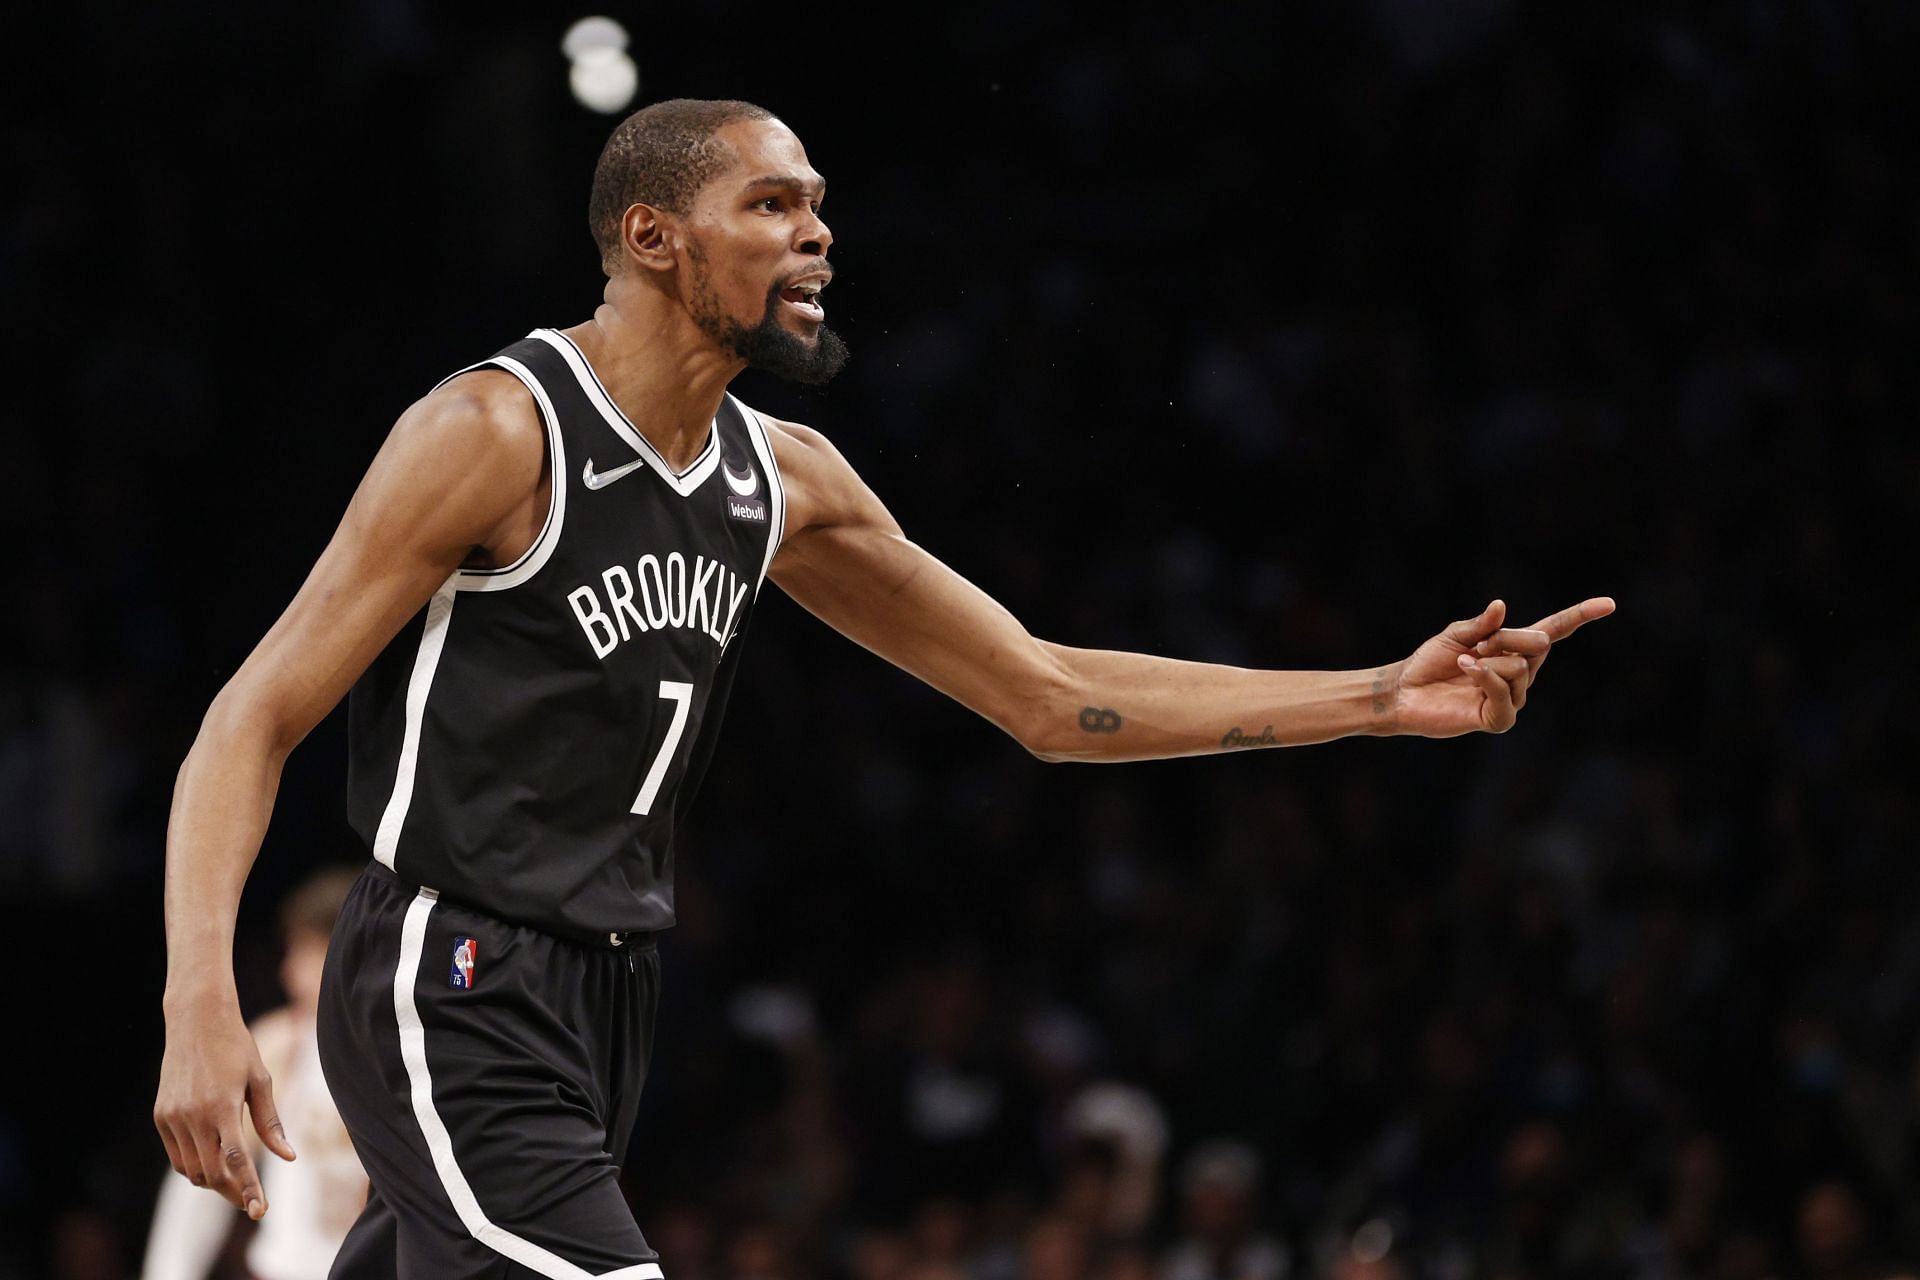 Kevin Durant of the Brooklyn Nets reacts during the Eastern Conference play-in tournament against the Cleveland Cavaliers on April 12 in the Brooklyn borough of New York City. The Nets won 115-108.